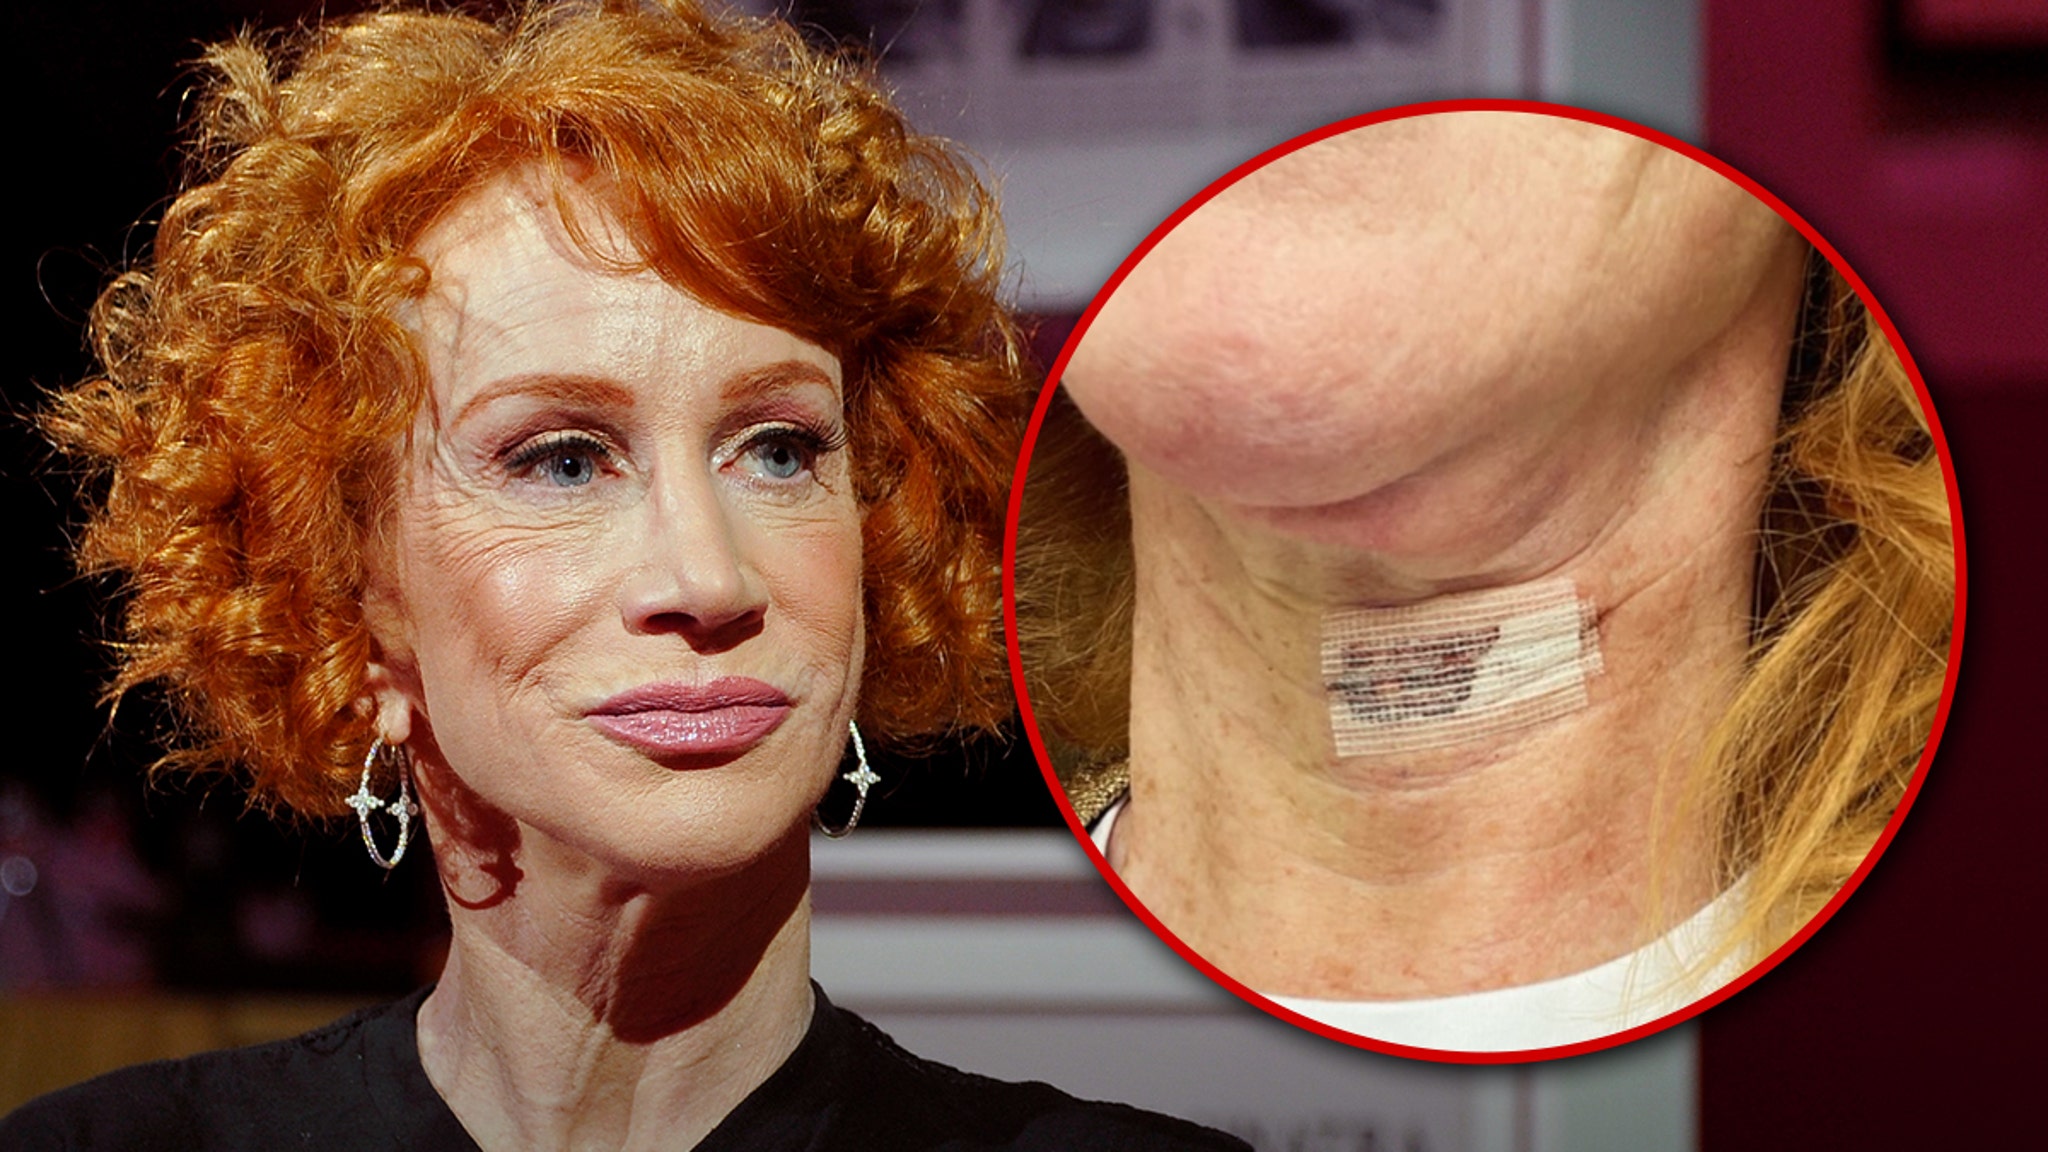 Kathy Griffin Shares IG Pic After Second Vocal Cord Surgery